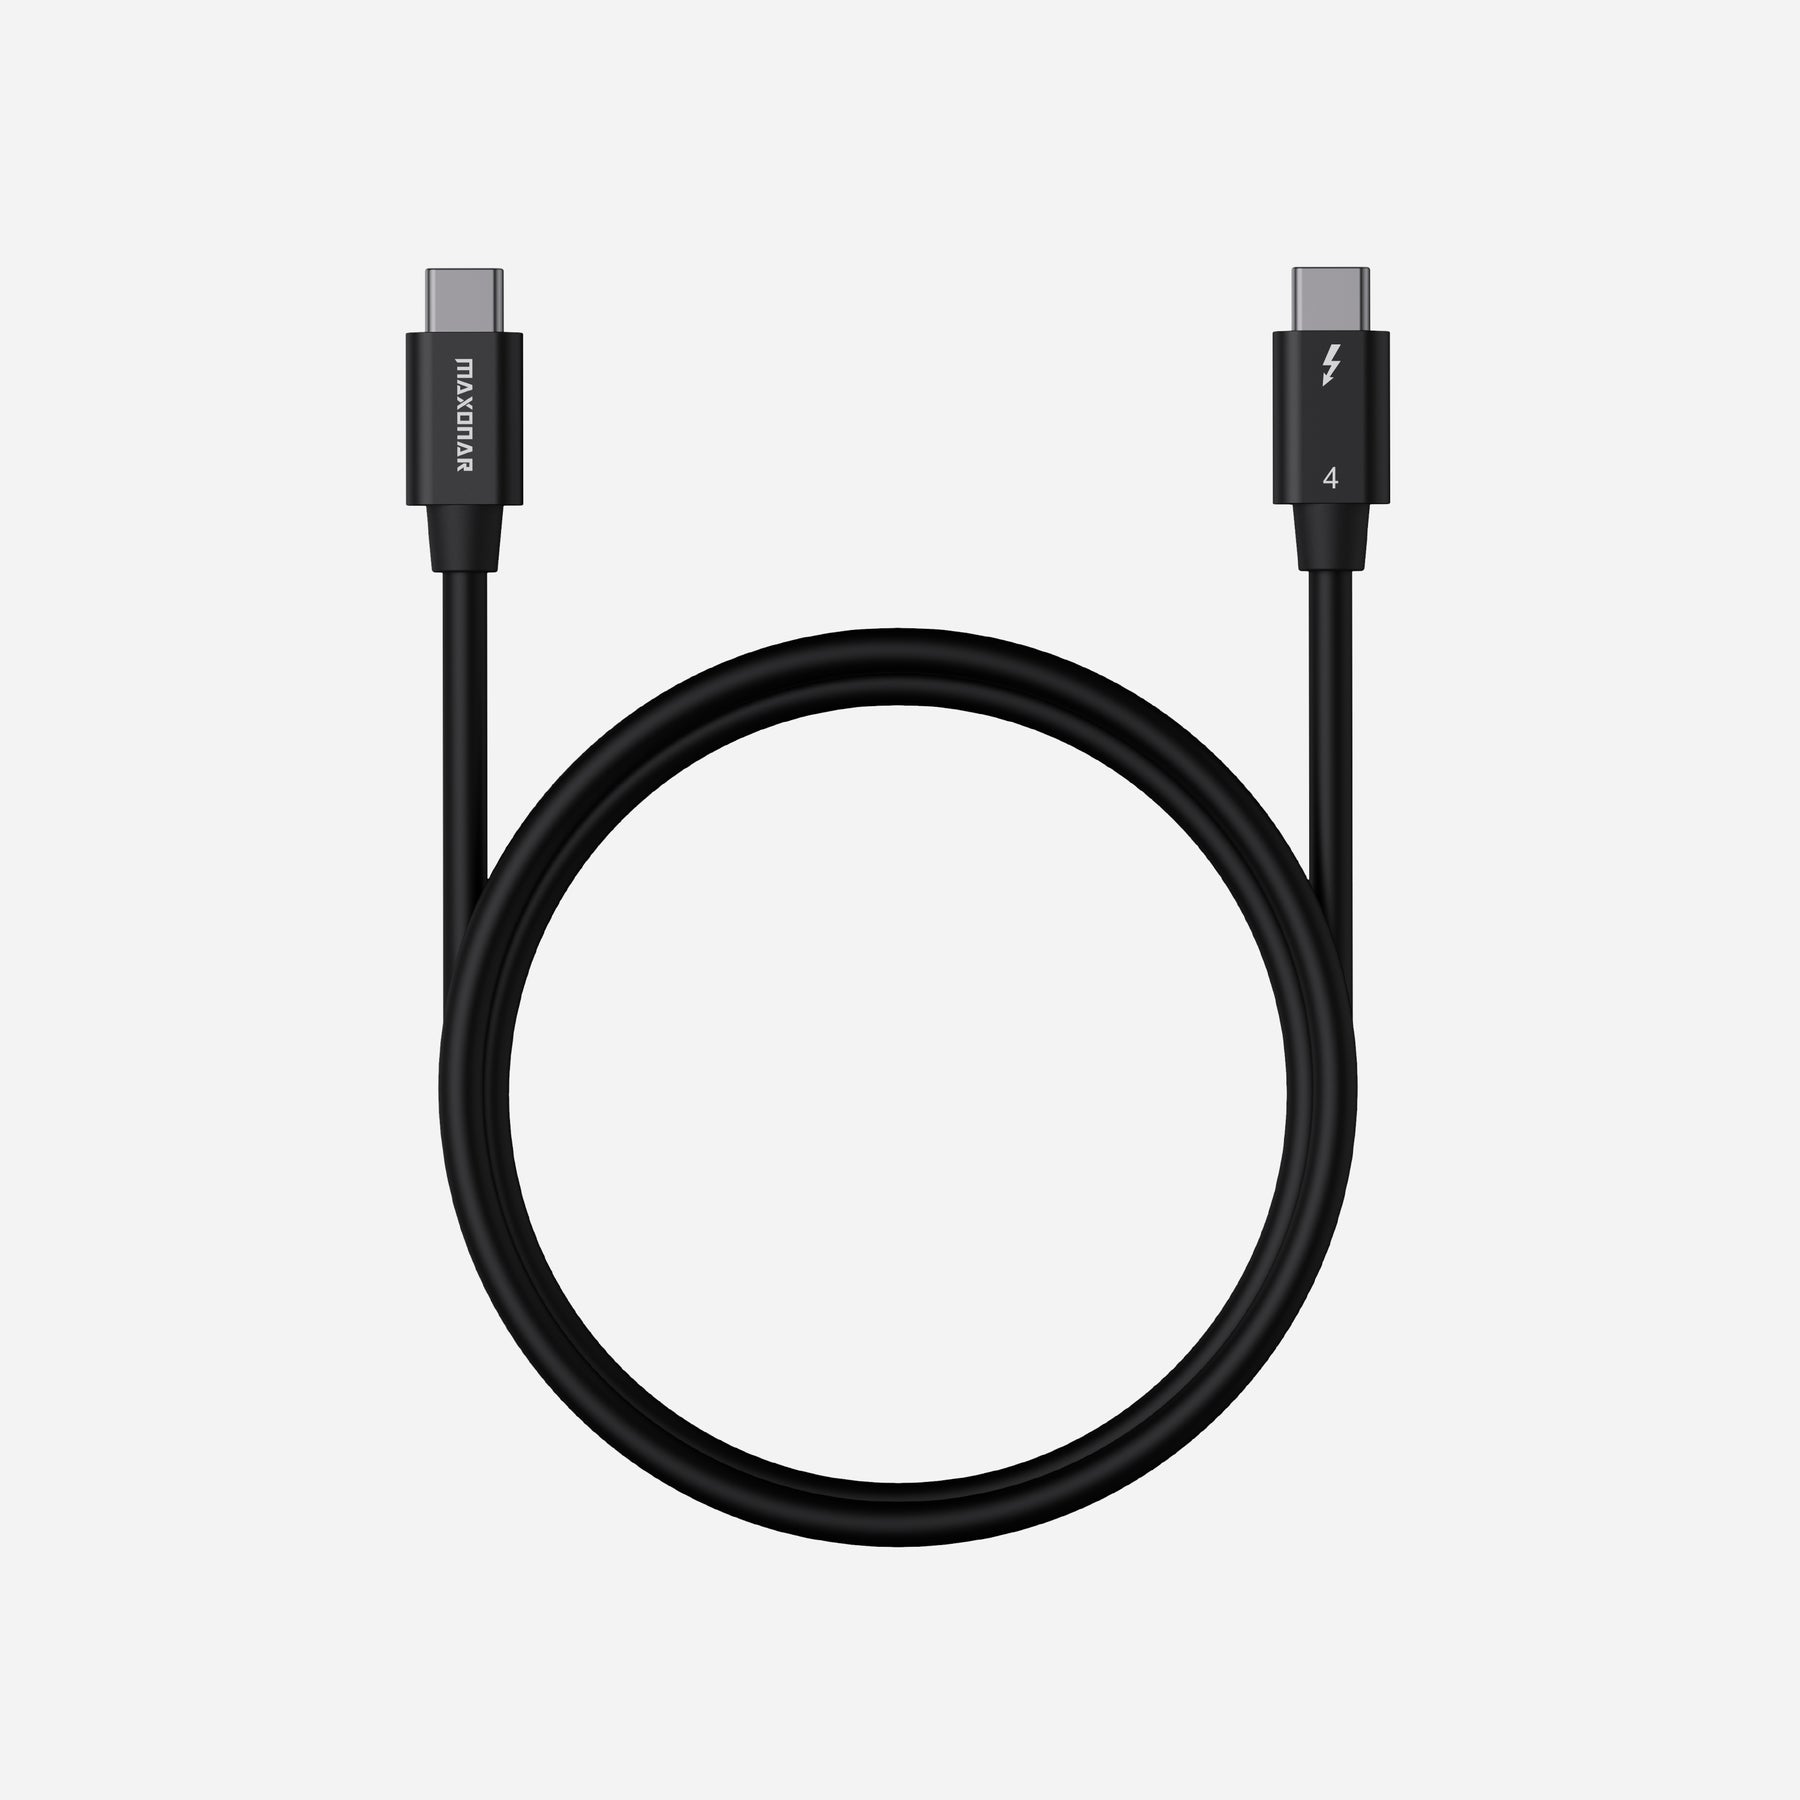 Cable 0.8m Thunderbolt 3 USB-C 40Gbps - Cables y adaptadores Thunderbolt 3